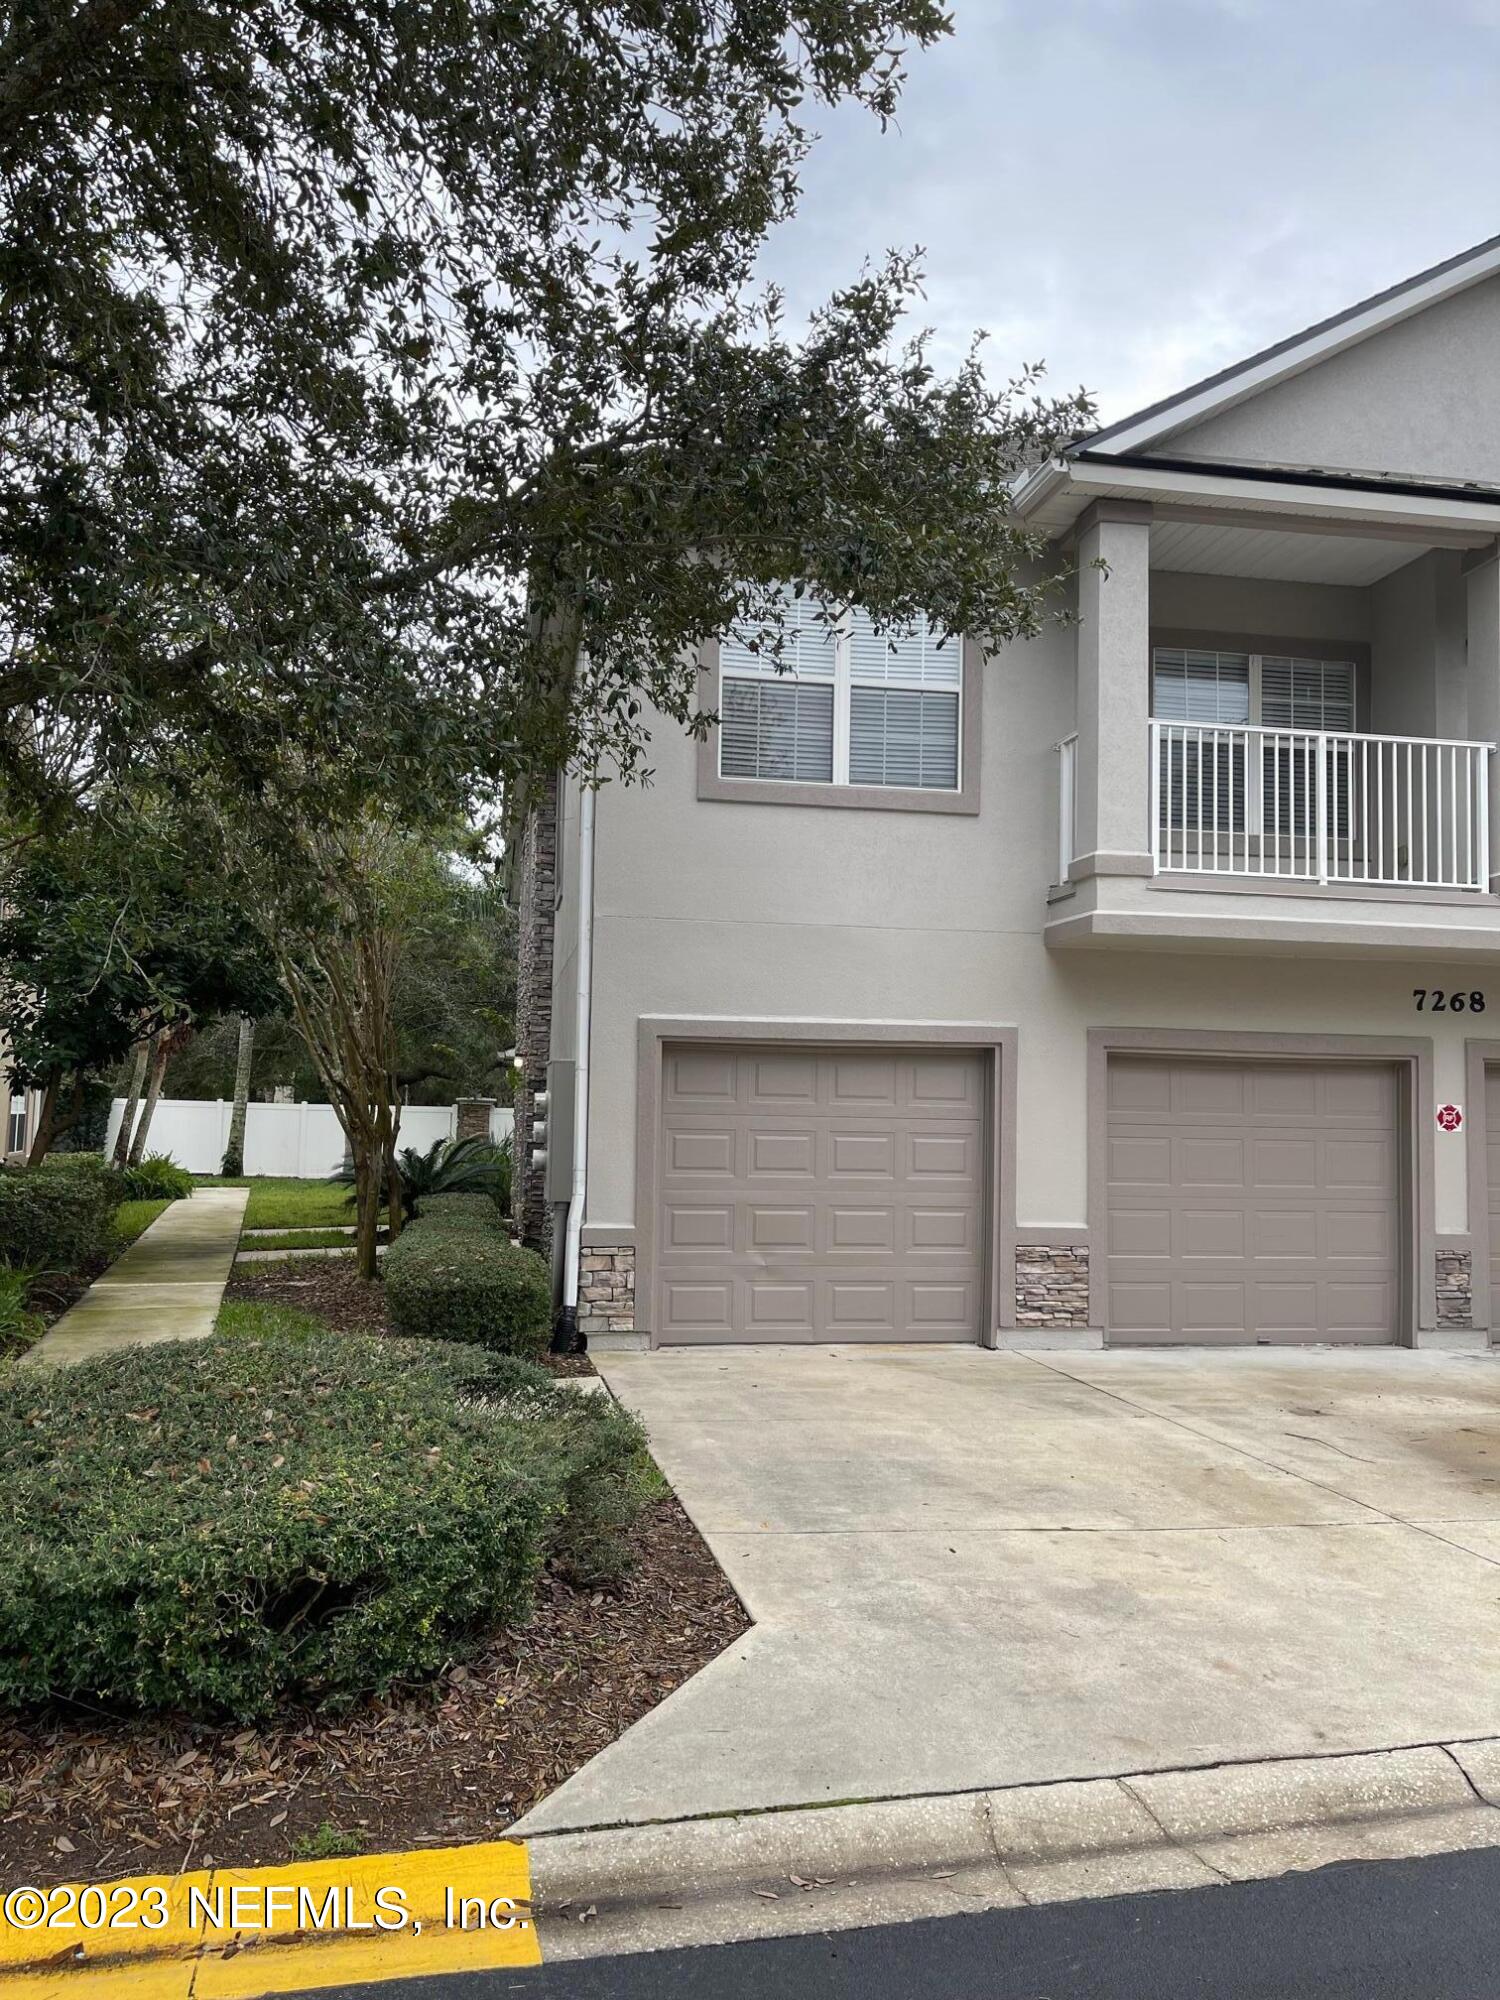 Jacksonville, FL home for sale located at 7268 DEERFOOT POINT Circle 3-2, Jacksonville, FL 32256